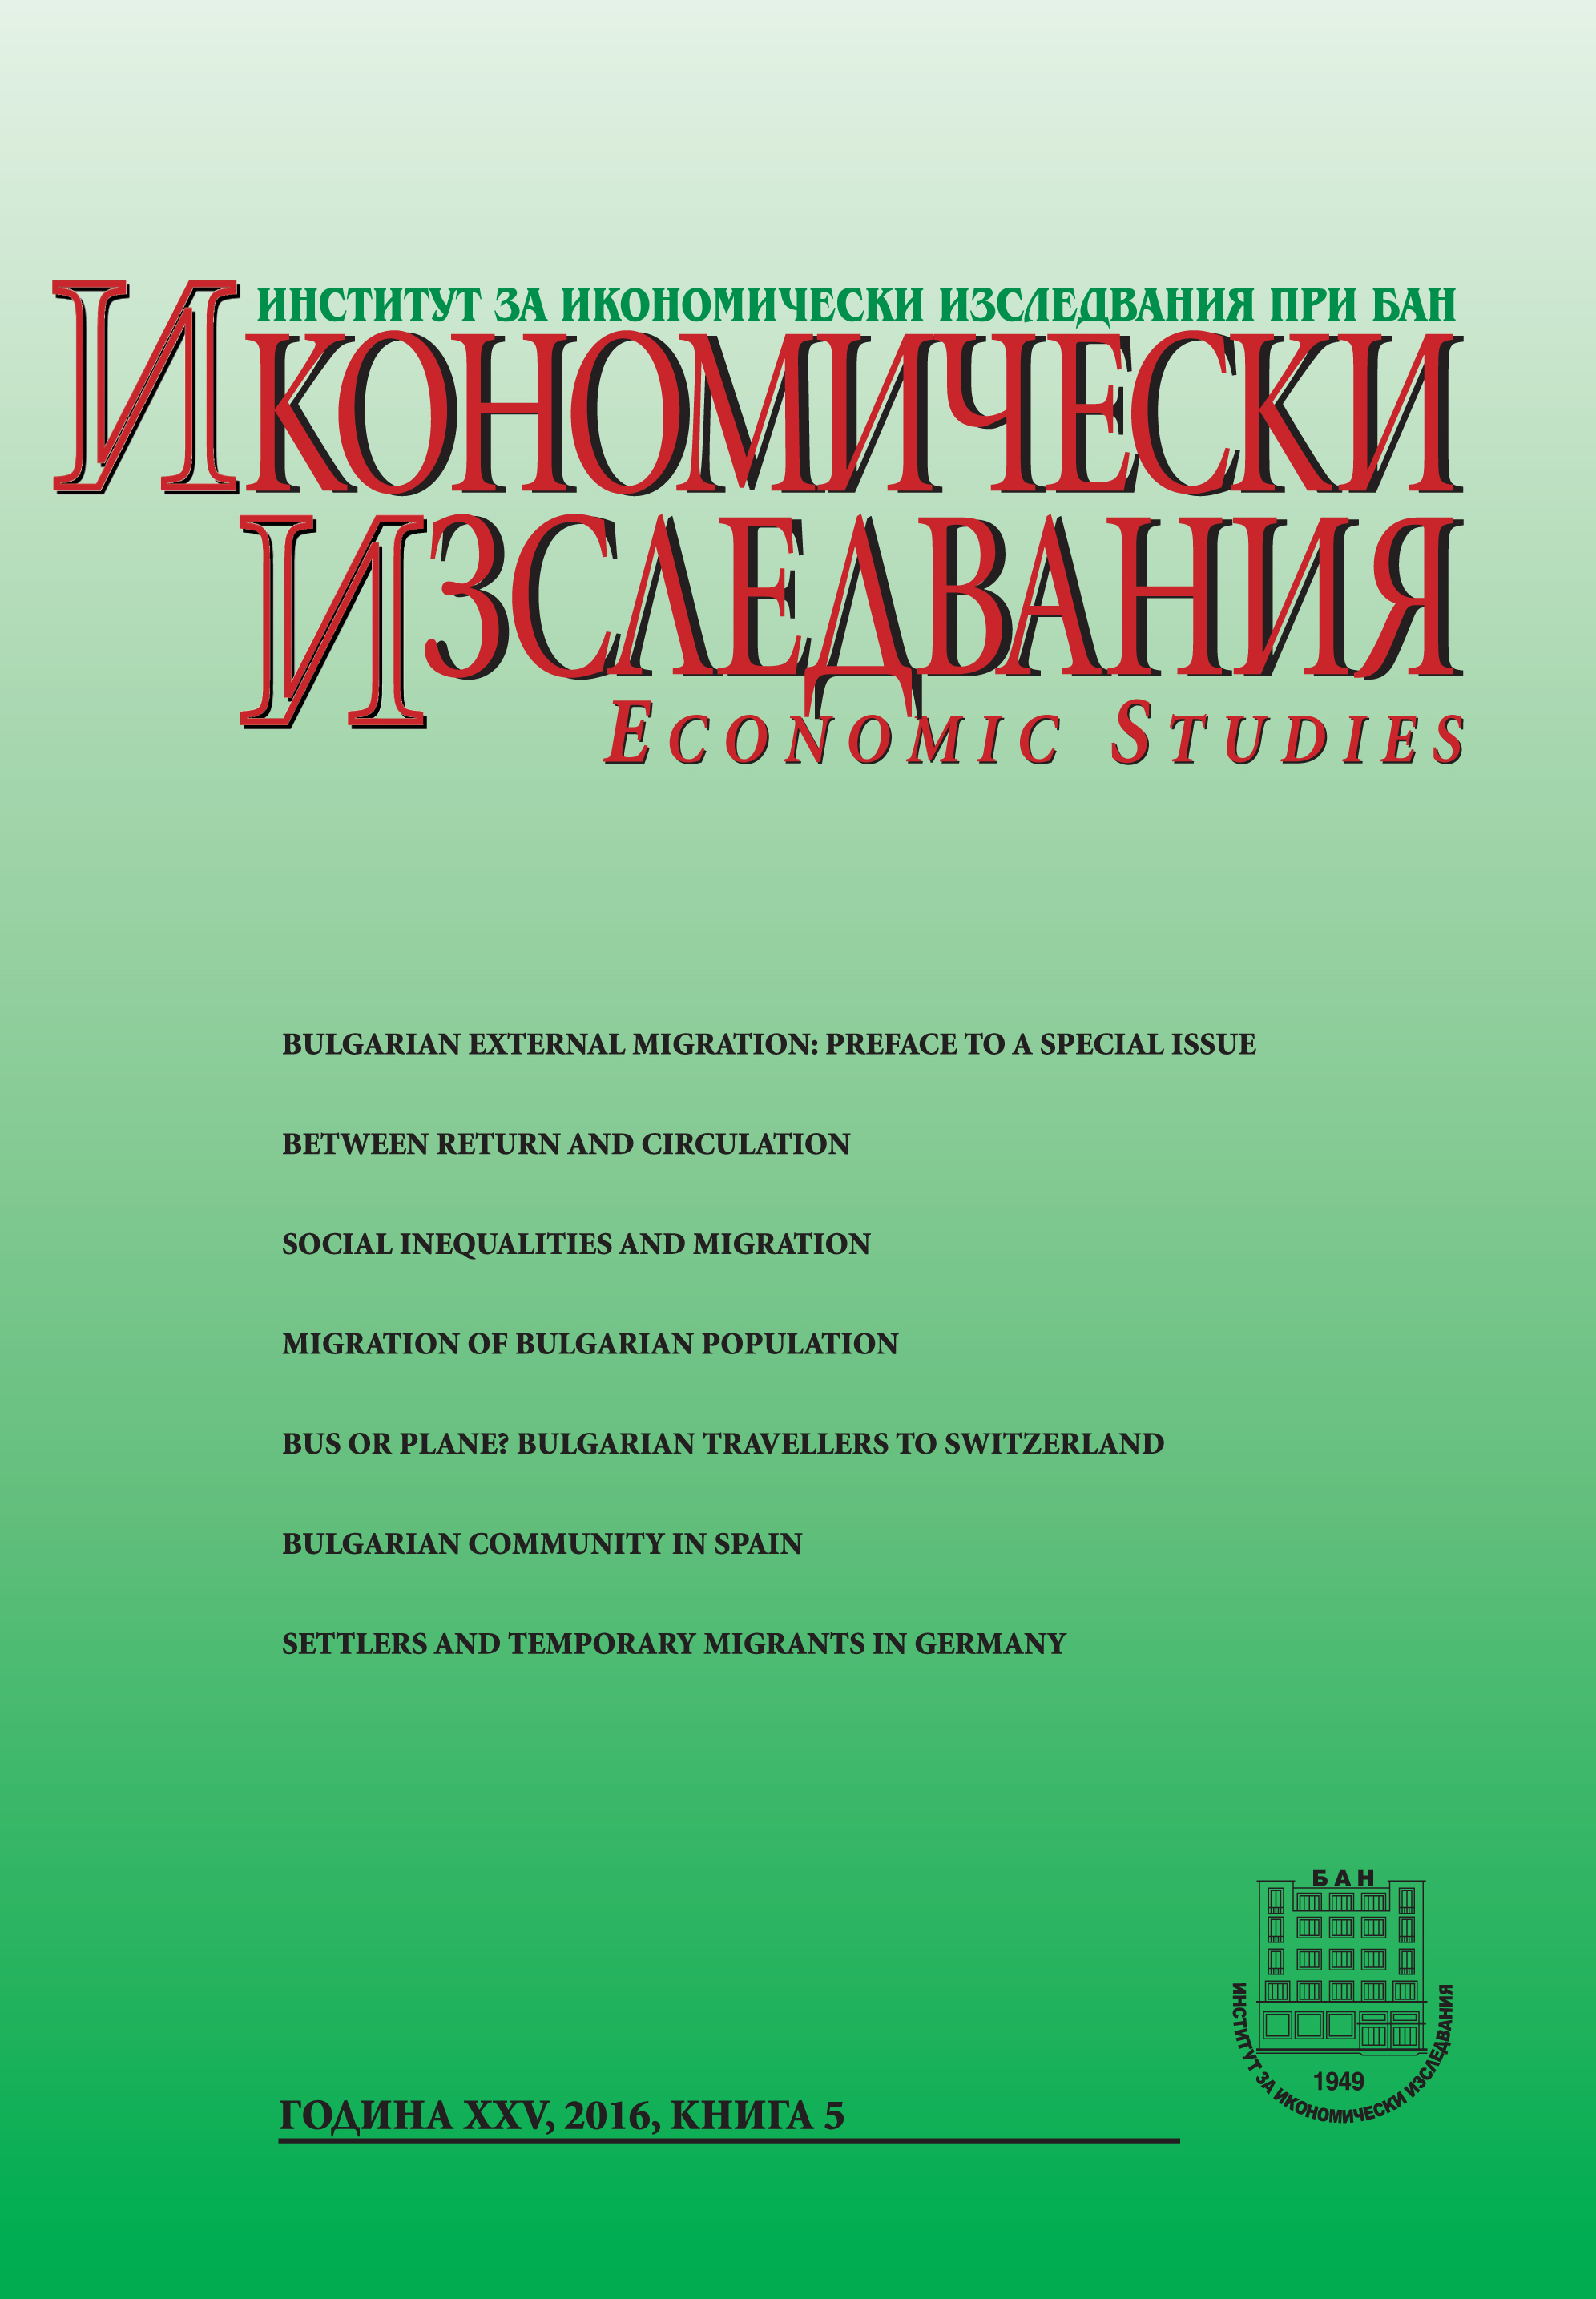 Between Return and Circulation: Experiences of Bulgarian Migrants Cover Image